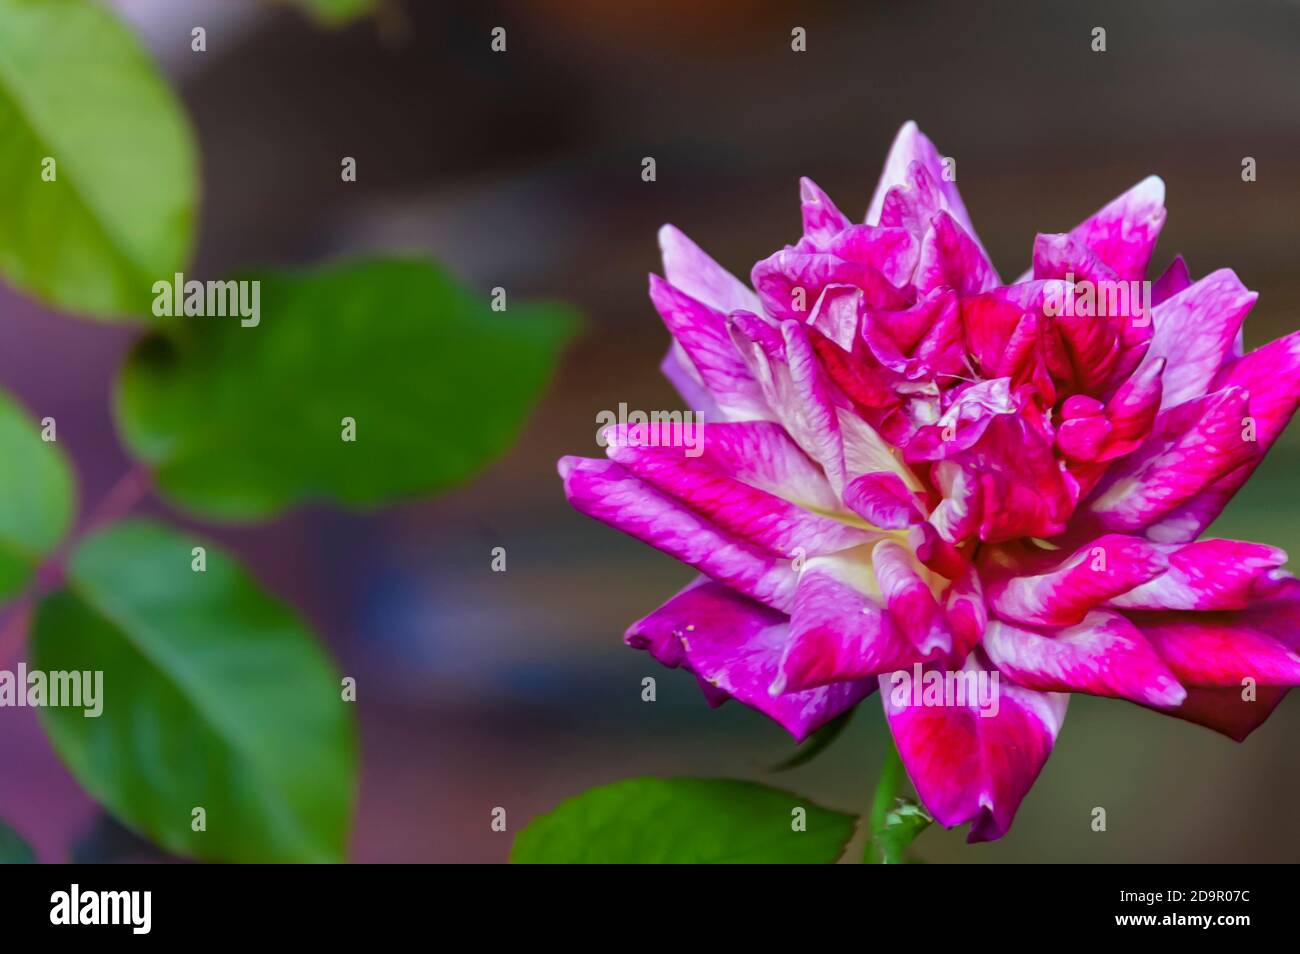 A close up of a pink rose in a home garden. Stock Photo